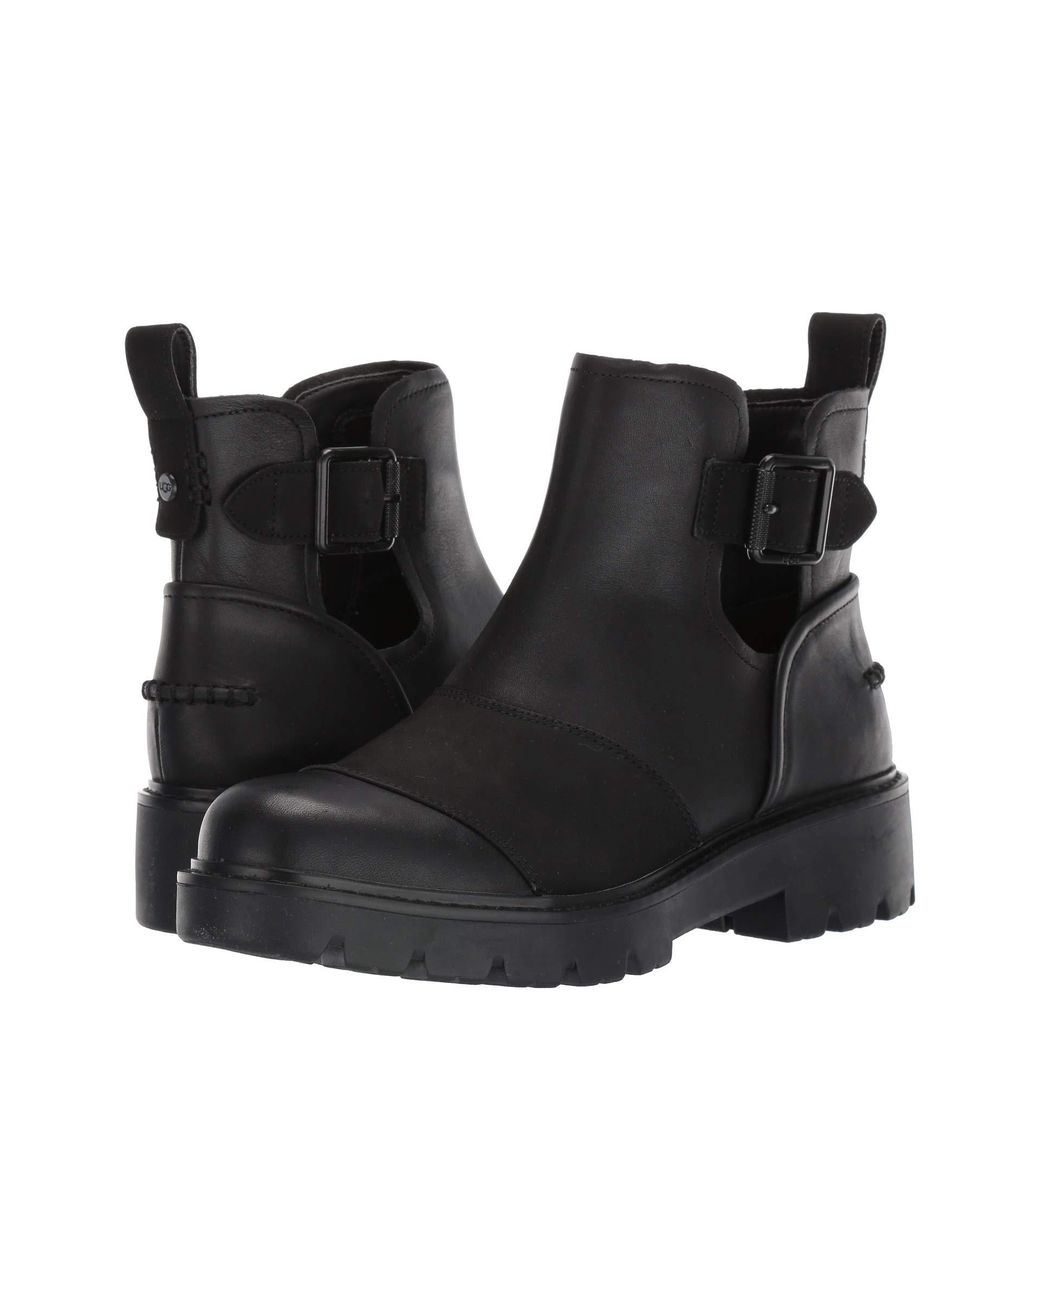 UGG Leather Stockton in Black Leather (Black) - Save 64% - Lyst